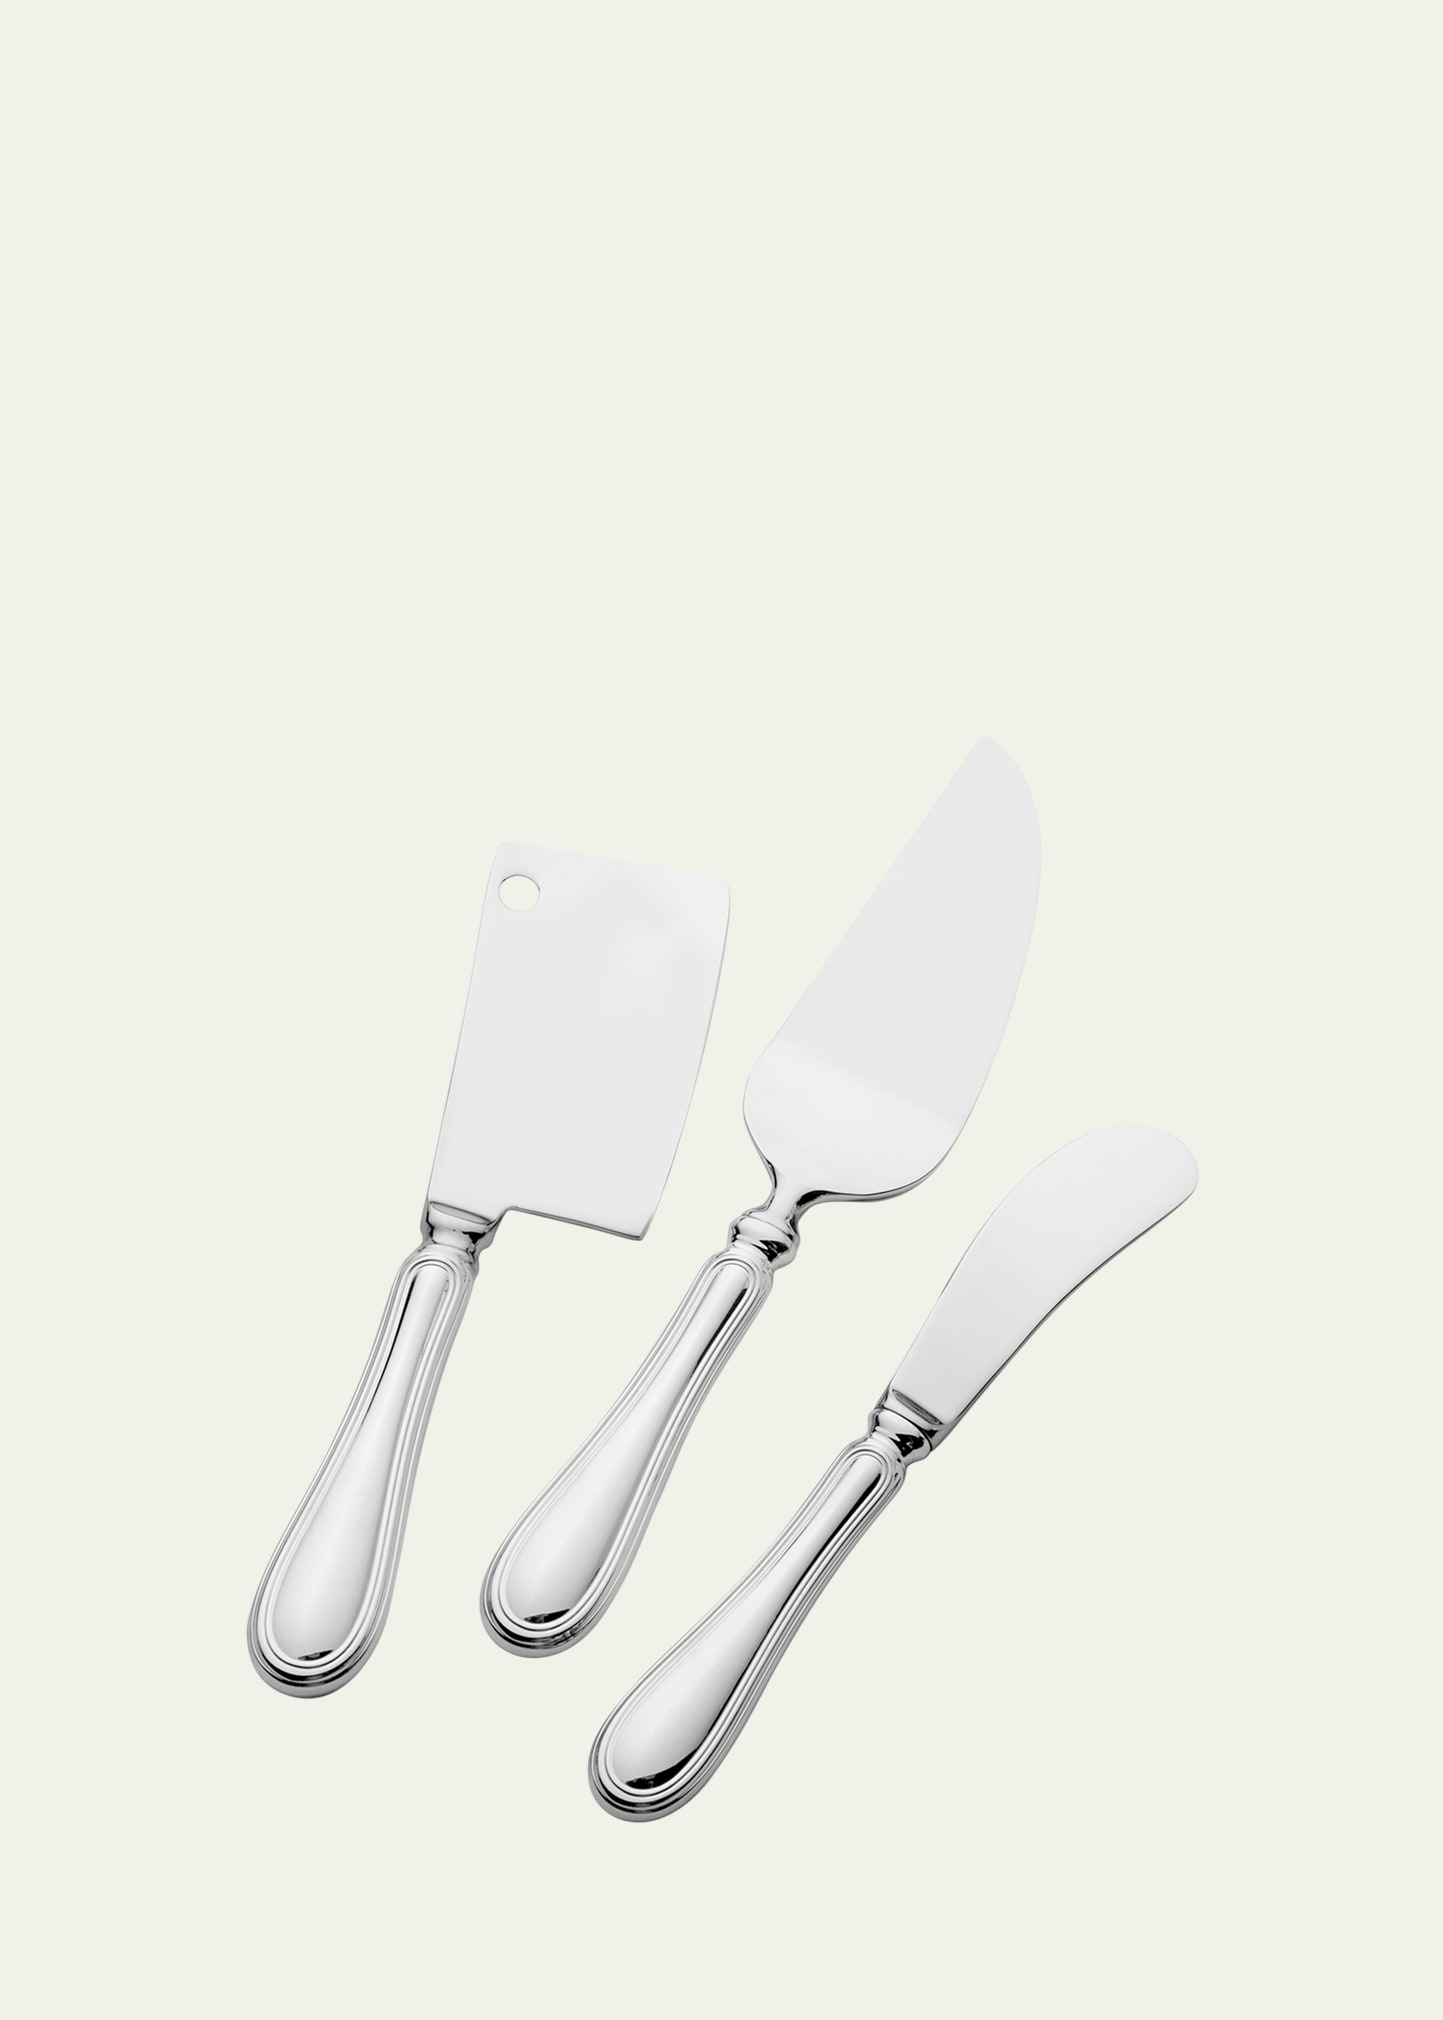 Grand Baroque 3-Piece Cheese Knife Set